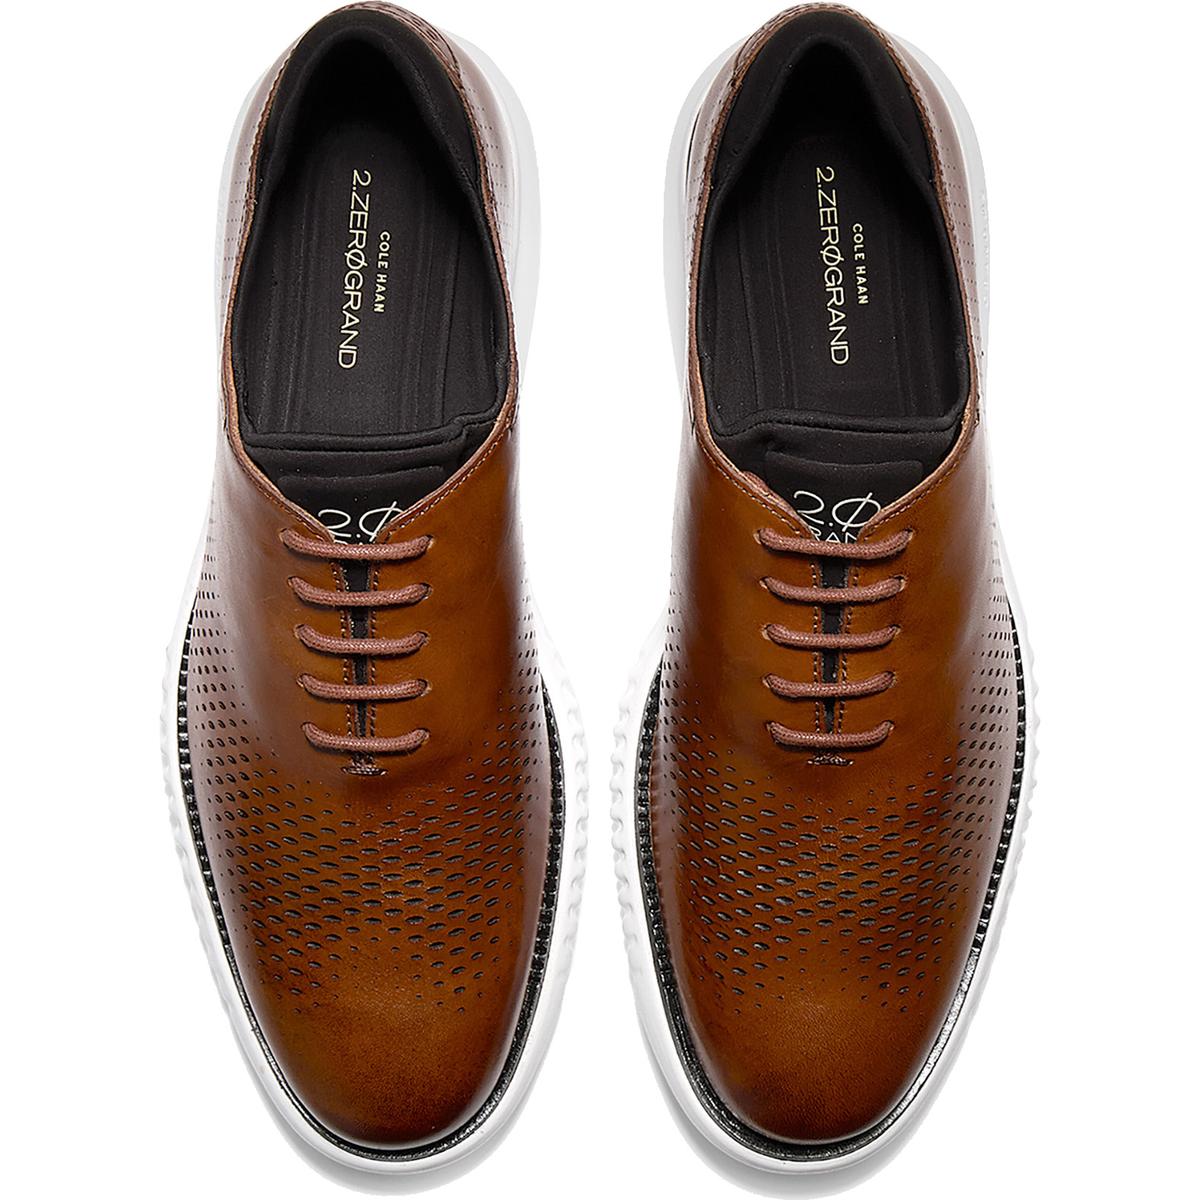 Cole Haan Mens 2 Zerogrand Tan Leather Oxfords Shoes 9.5 Wide (E) BHFO ...